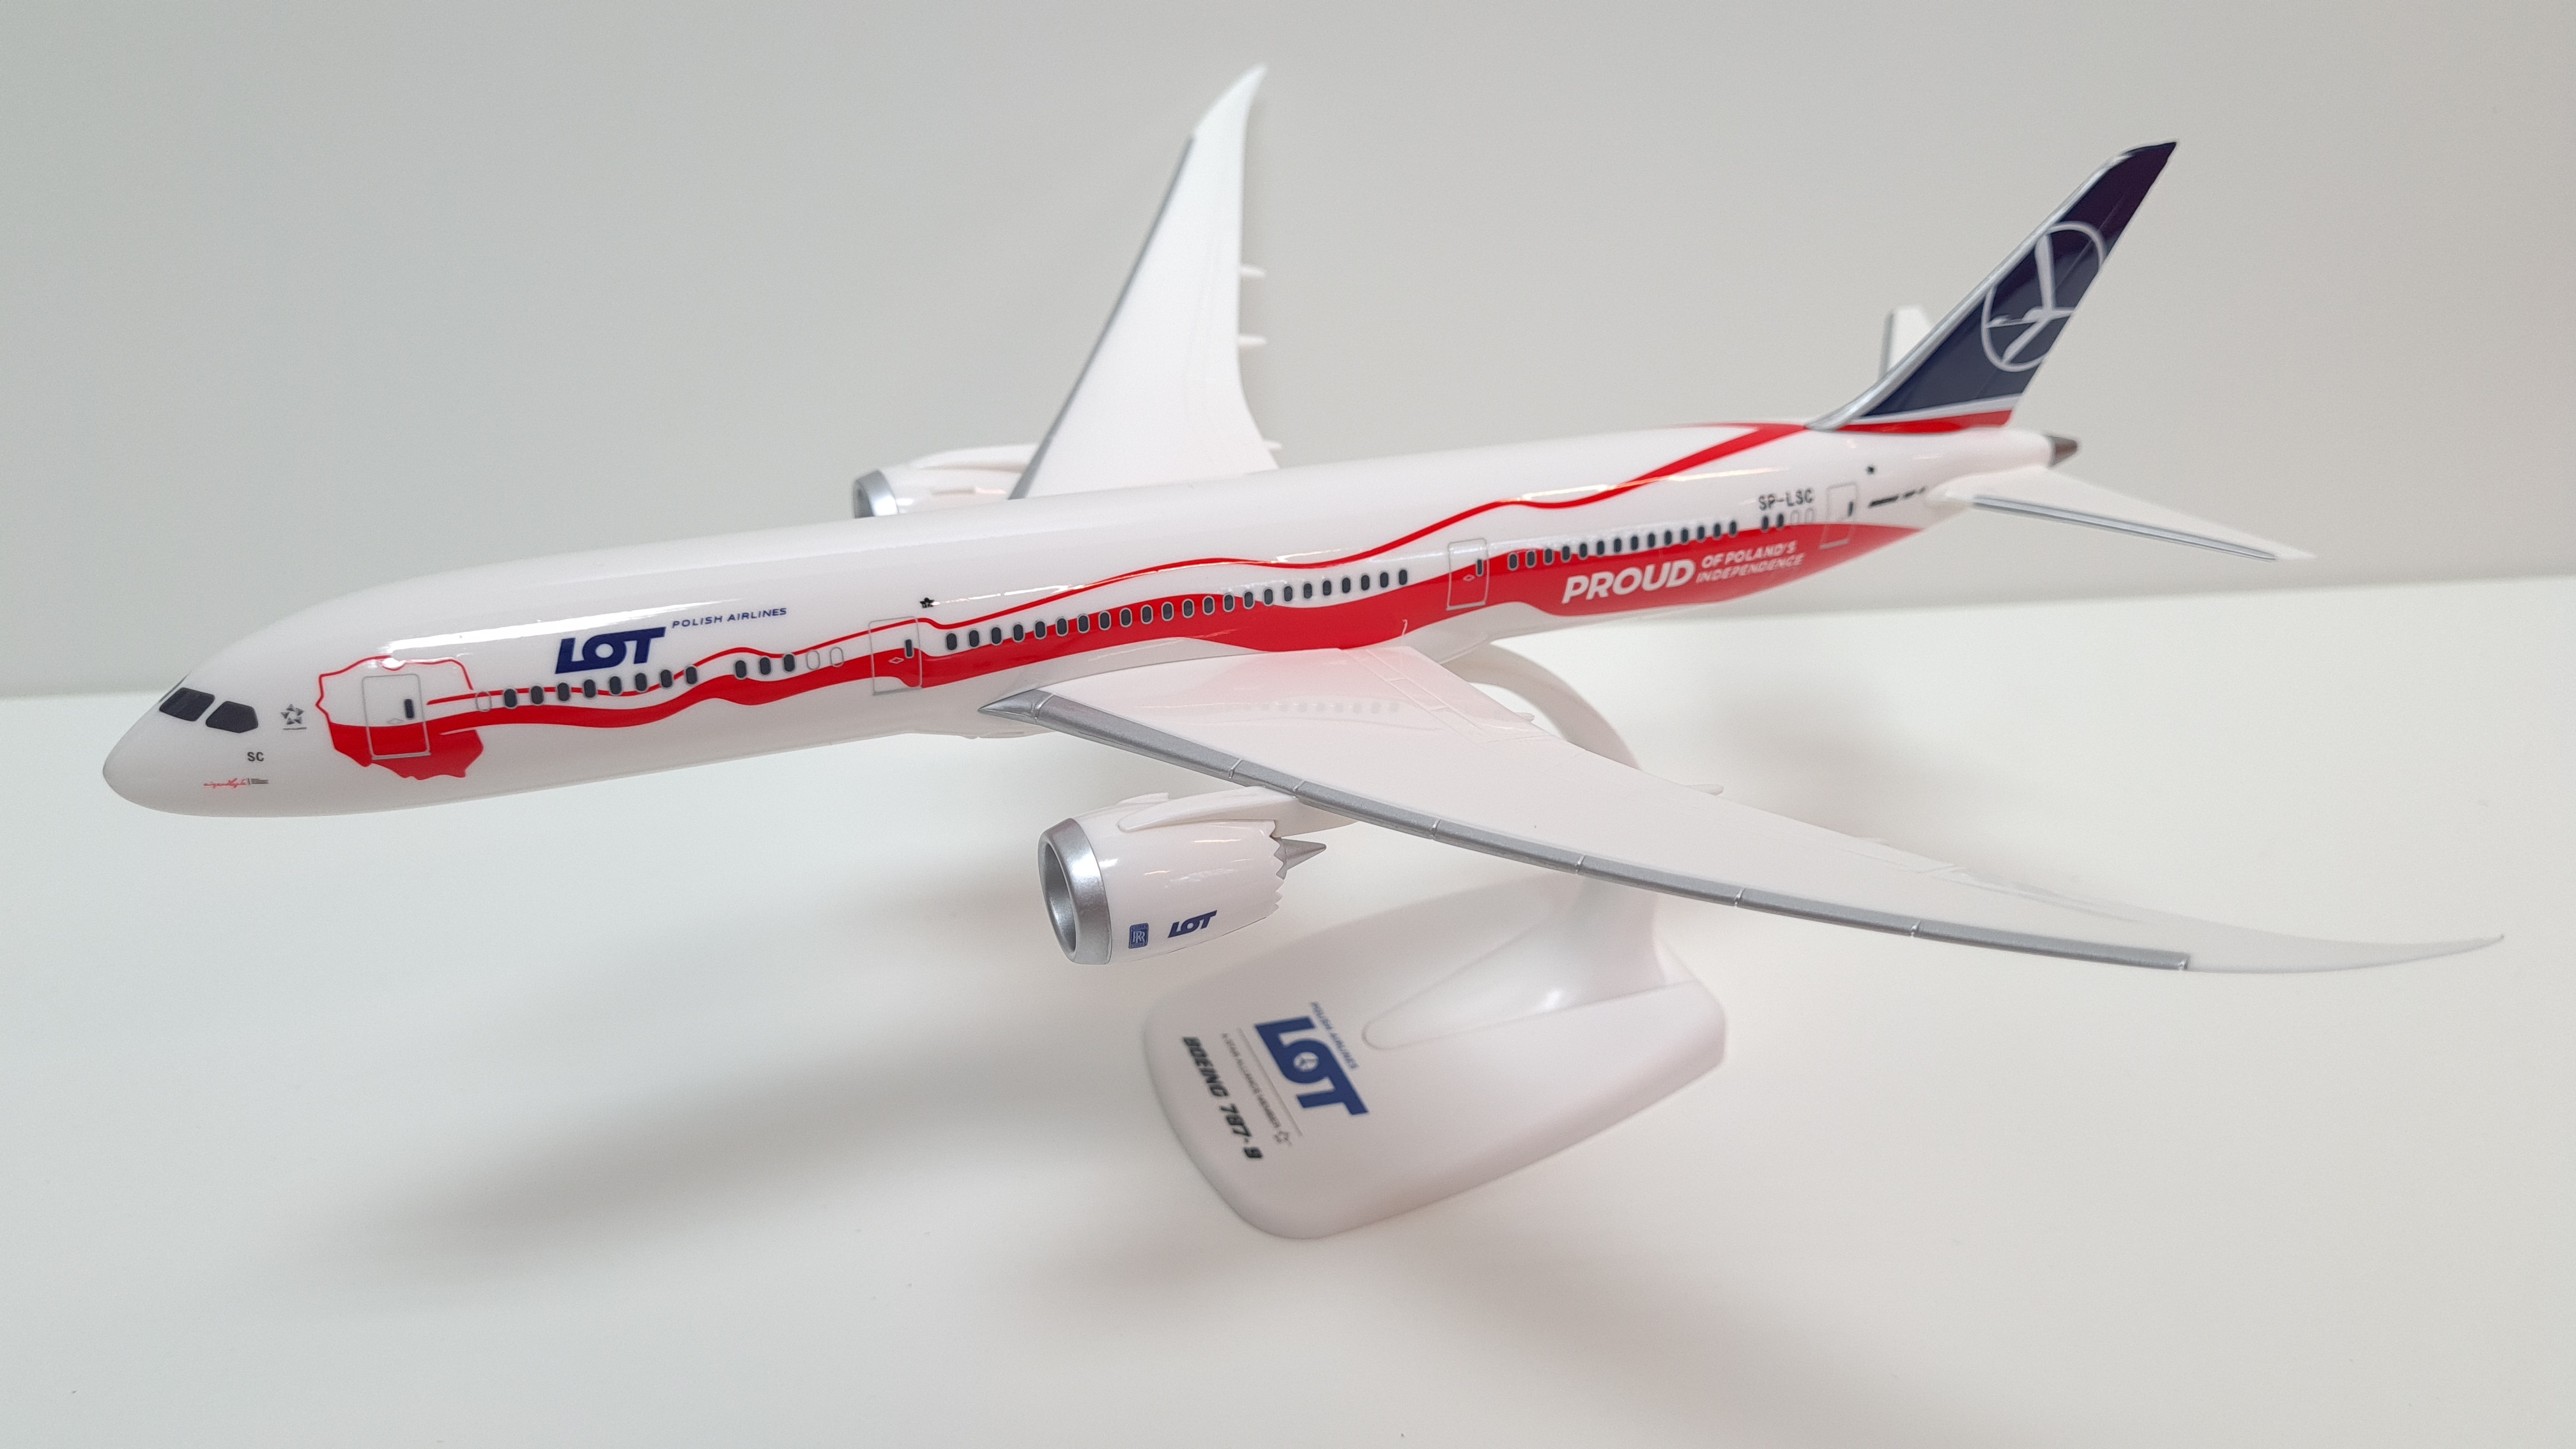 LOT Polish Airlines Boeing 787-9 